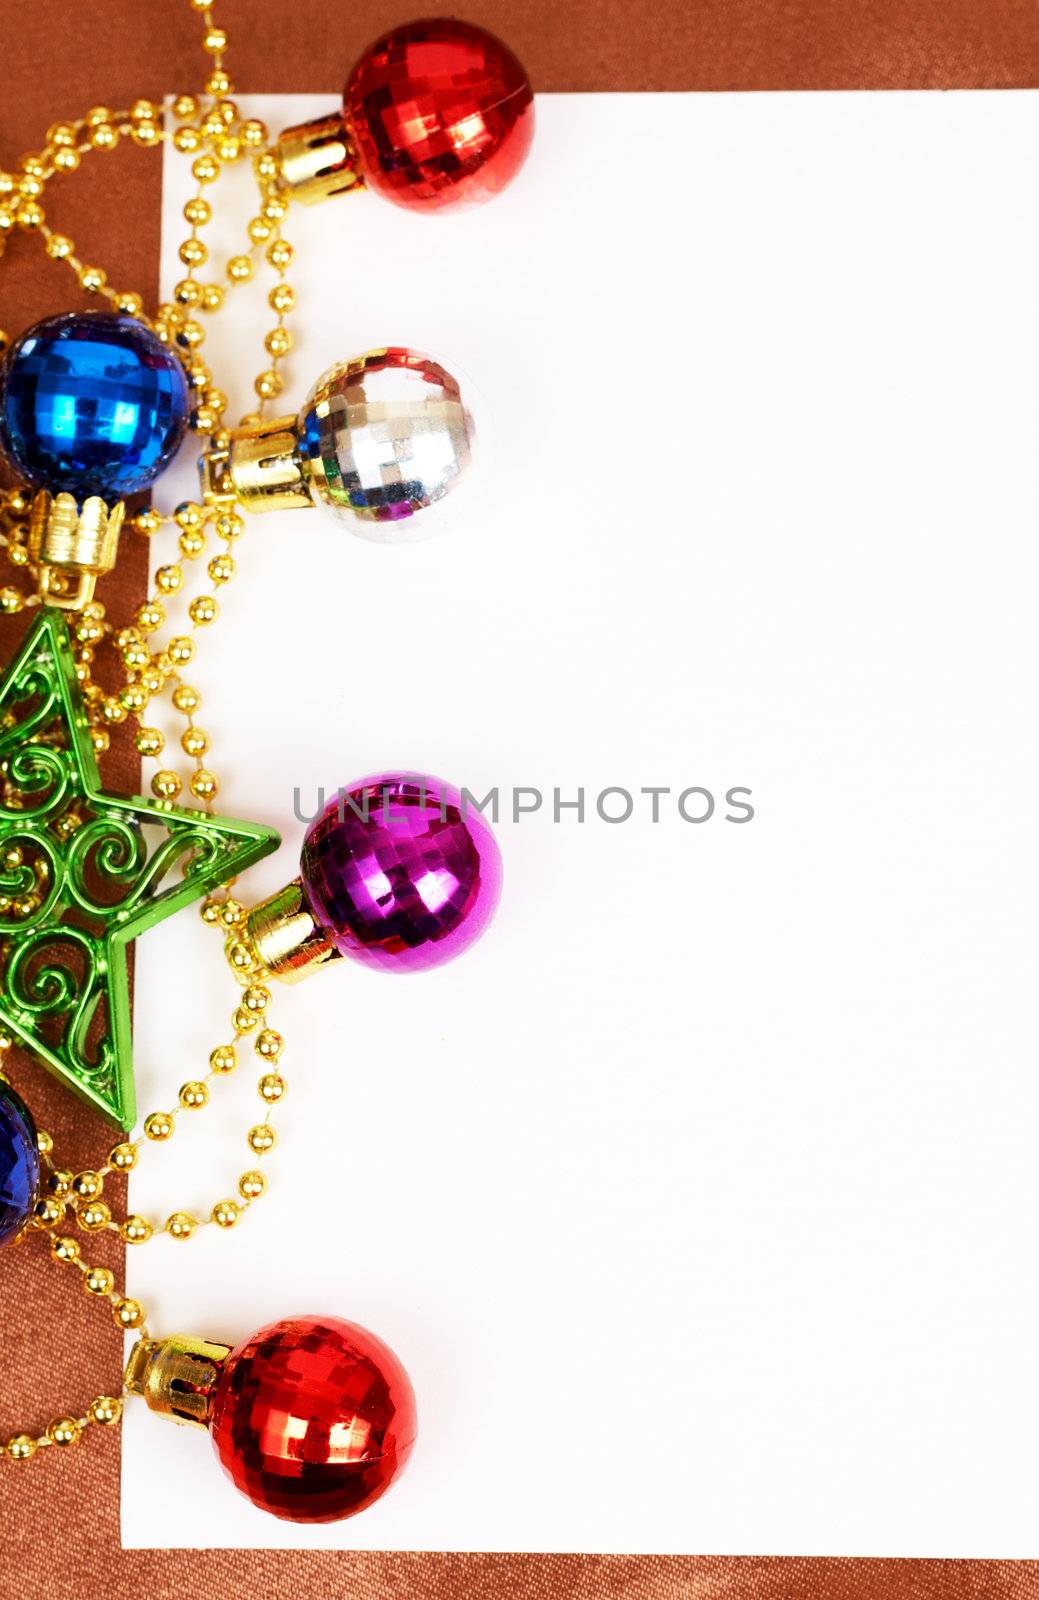 Colorful Christmas baubles and card by Elenat